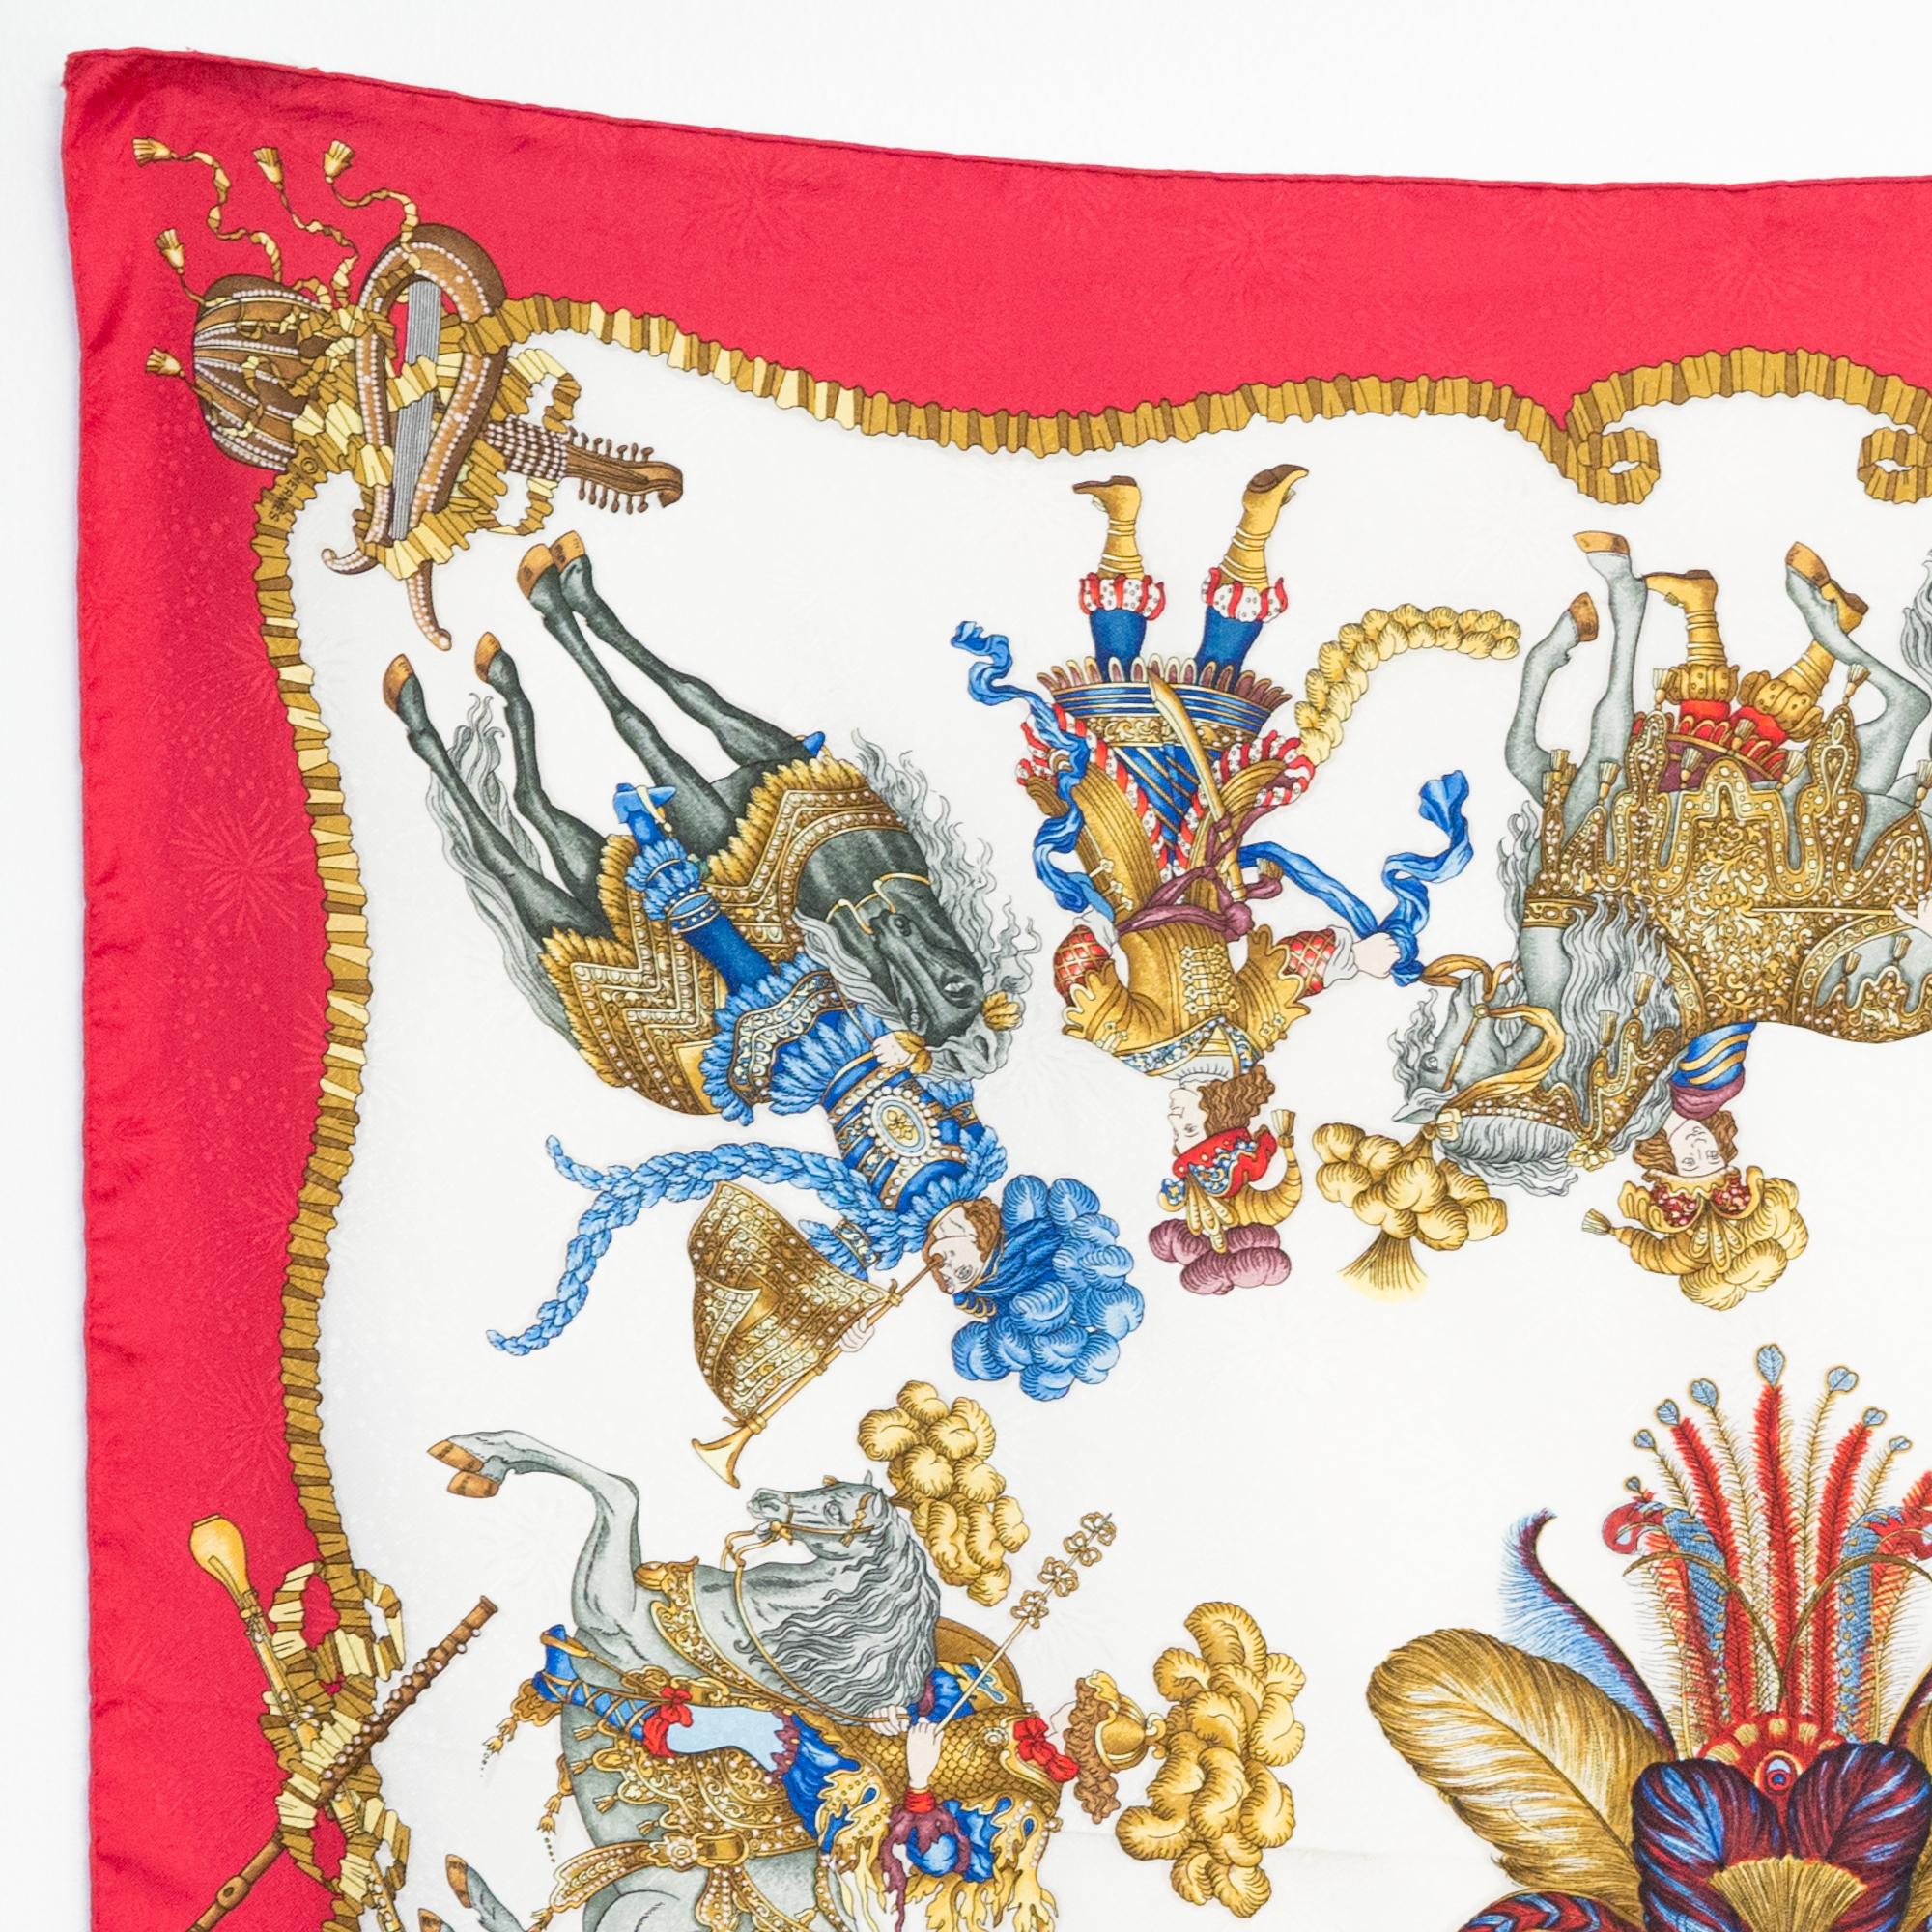 Hermes silk scarf Les Fetes du Roi Soleil by Caty Latham featuring a jacquard ground, a red border and a Hermès signature. 
First issue 1994
In good vintage condition. Made in France.
35,4in. (90cm)  X 35,4in. (90cm)
We guarantee you will receive